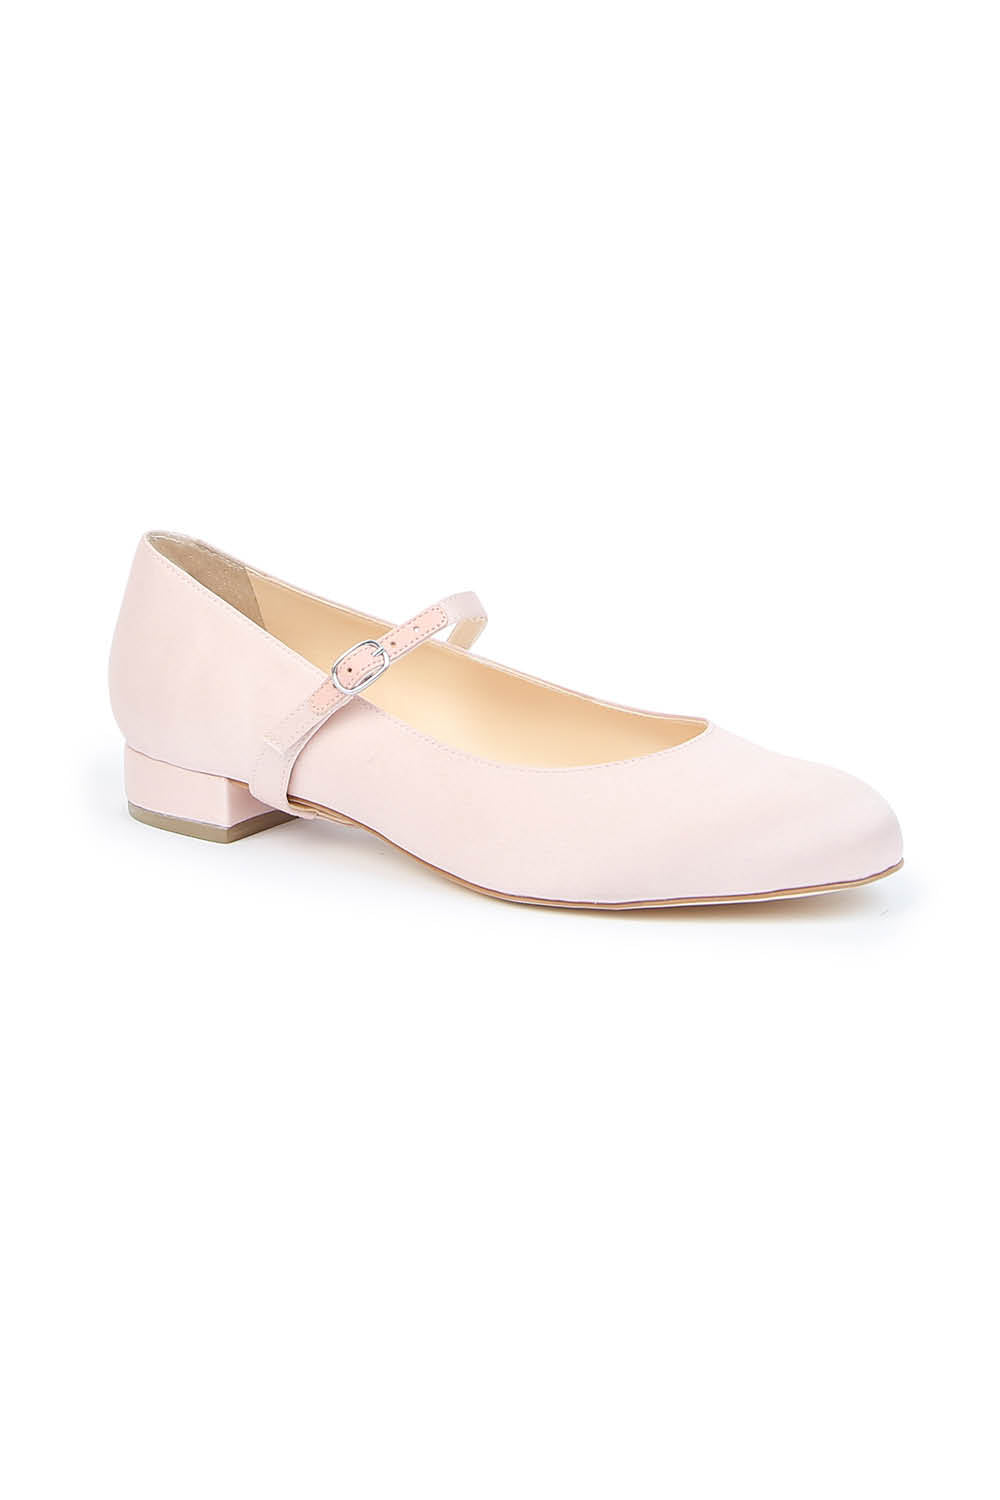 Rose Satin Ballet Flat with Twiggy Strap